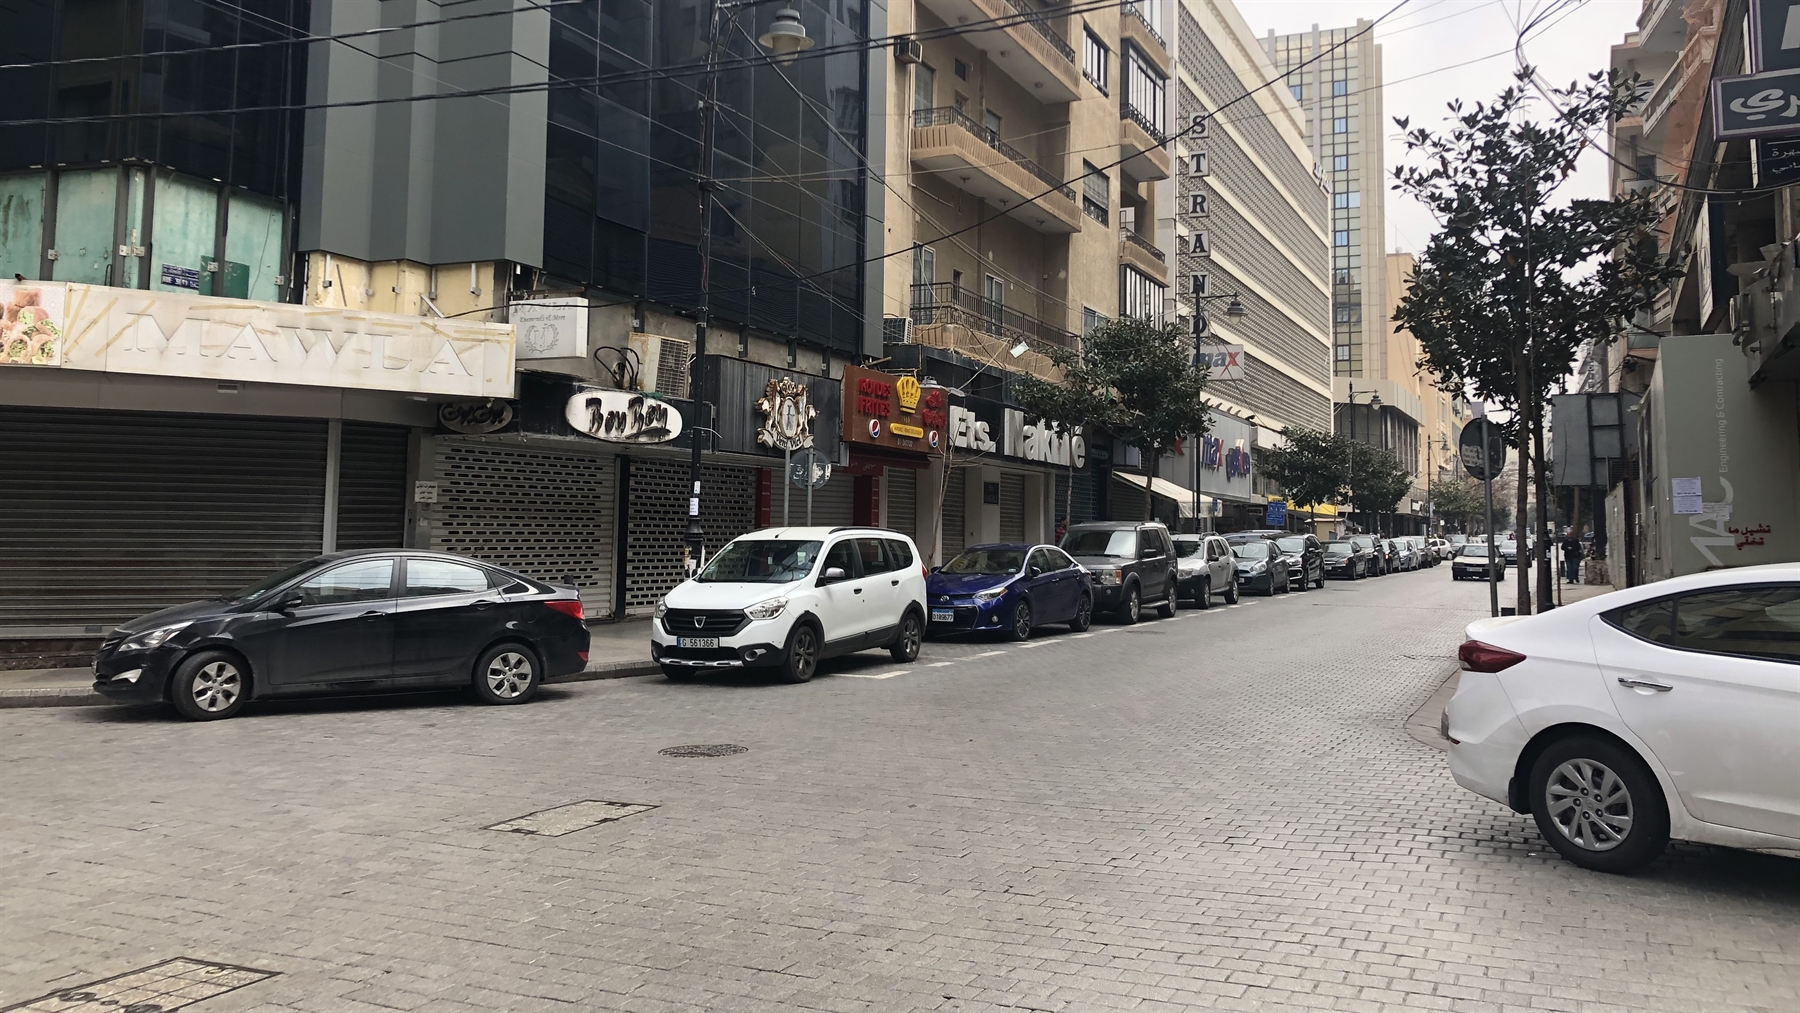 Stores and restaurants are closed on Hamra street (Photo: Mona Harb, April 2020)